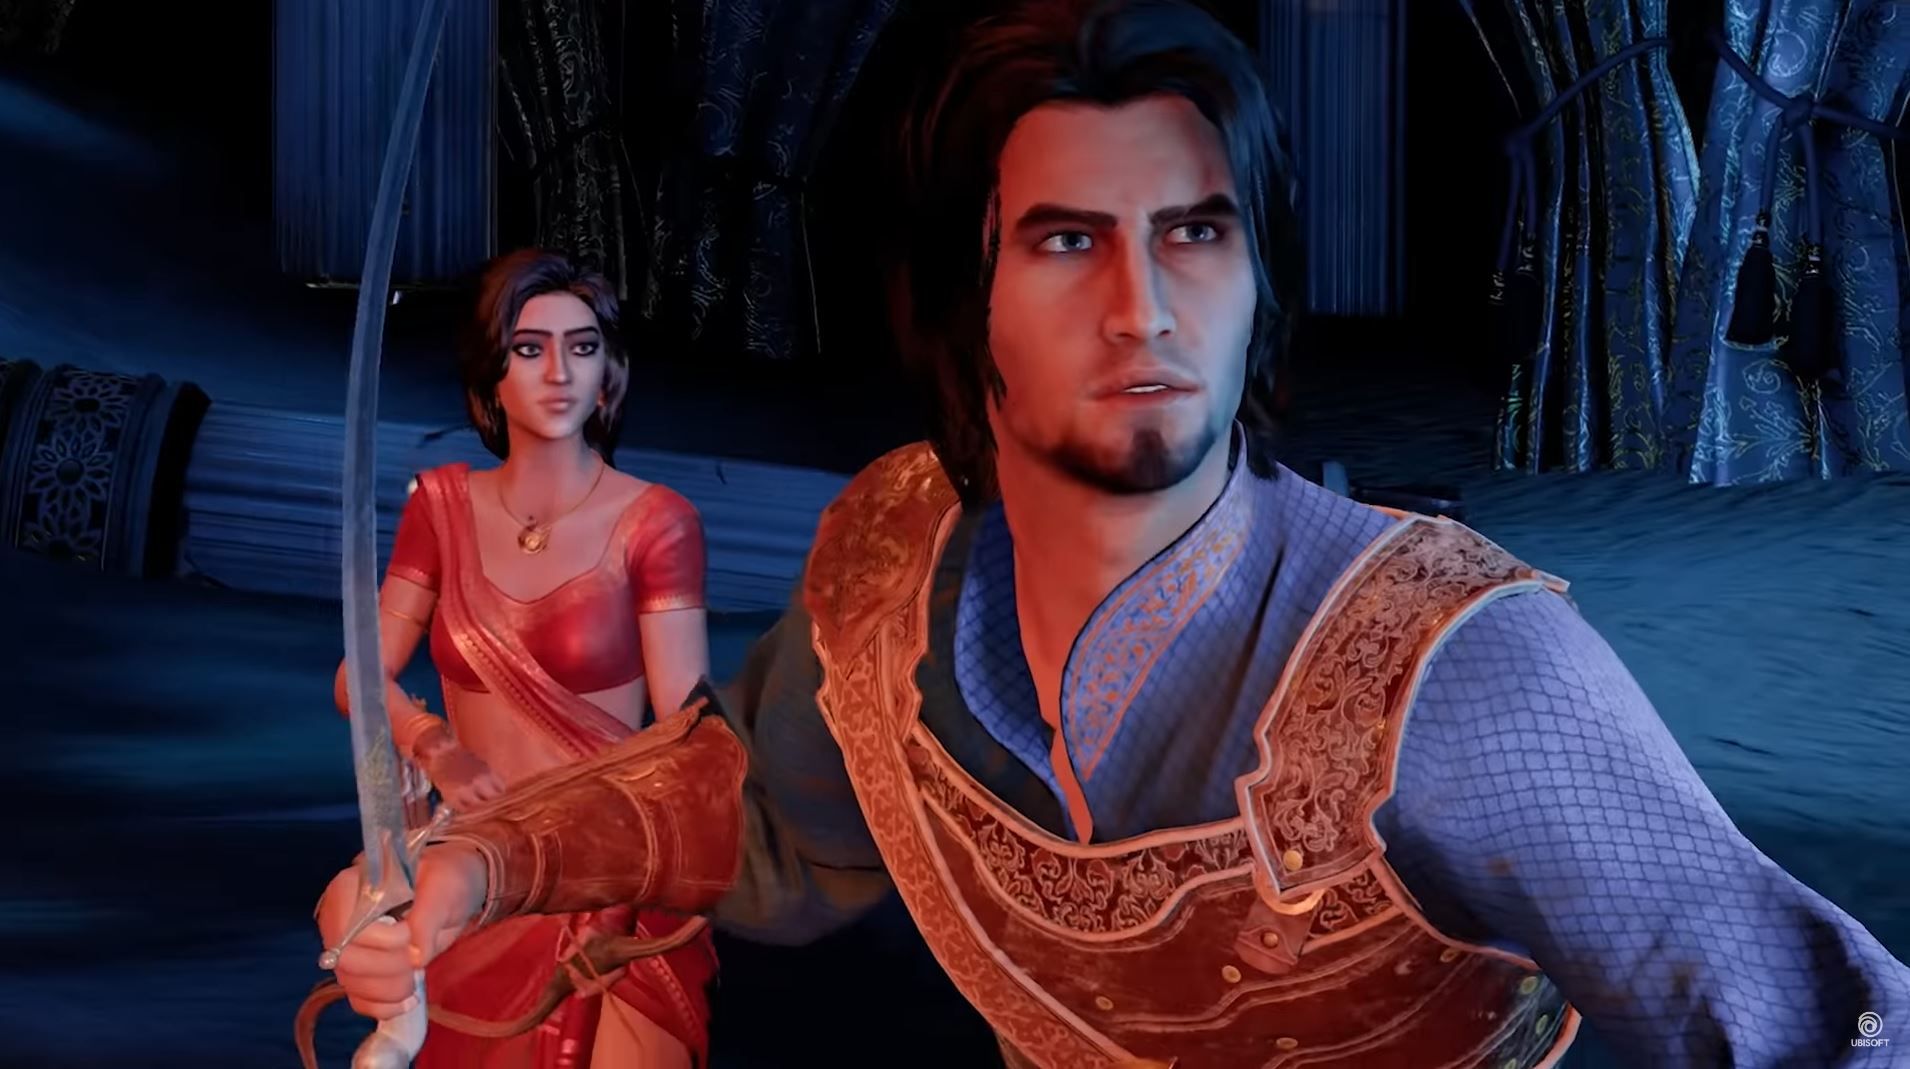 Buy Prince of Persia®: The Sands of Time